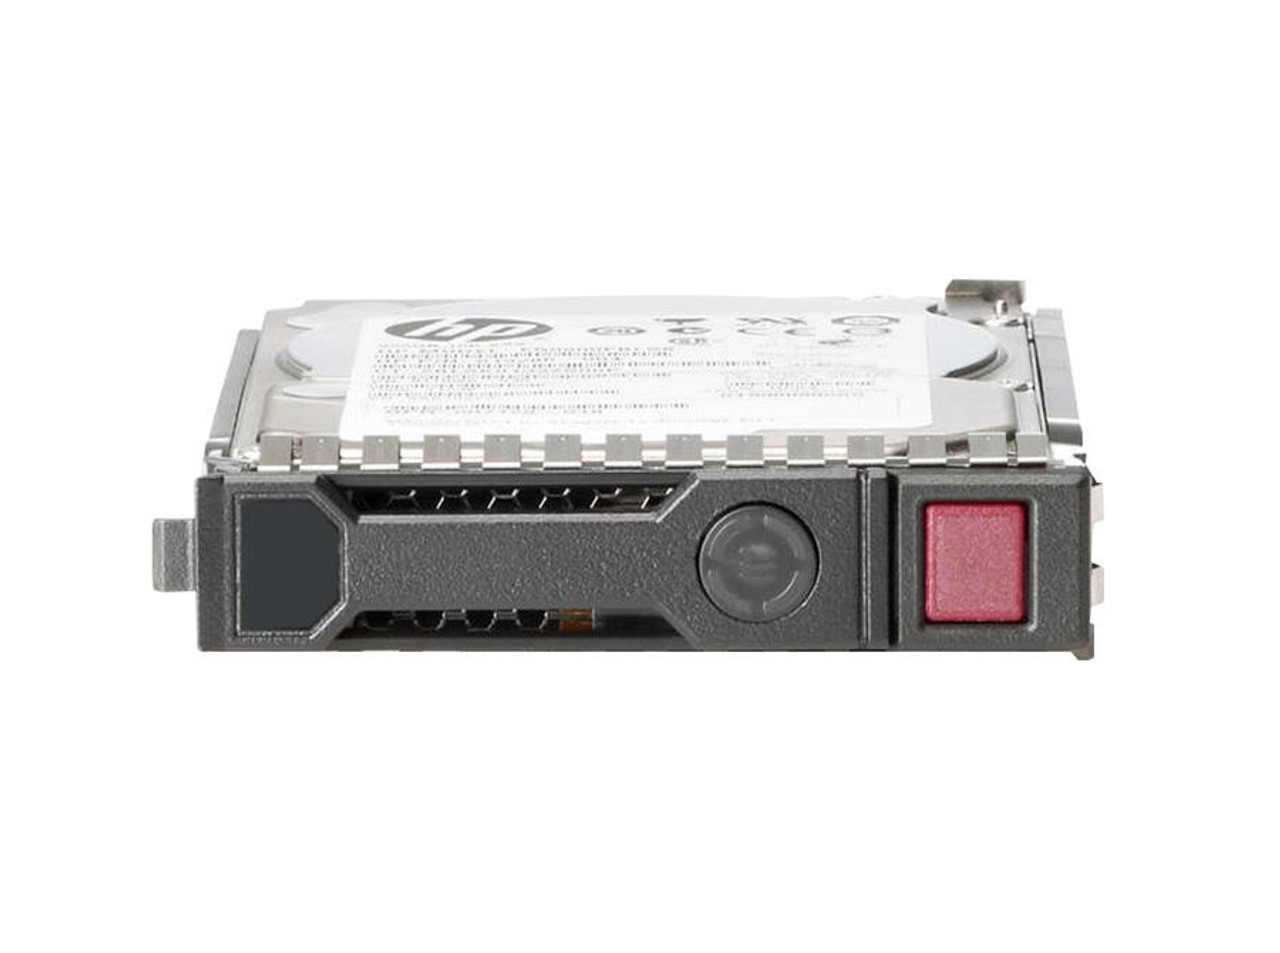 868230-001 HPE 10TB 7200RPM SAS 12Gbps Hot Swap (512e) Midline 3.5-inch Internal Hard Drive with Tray for MSA